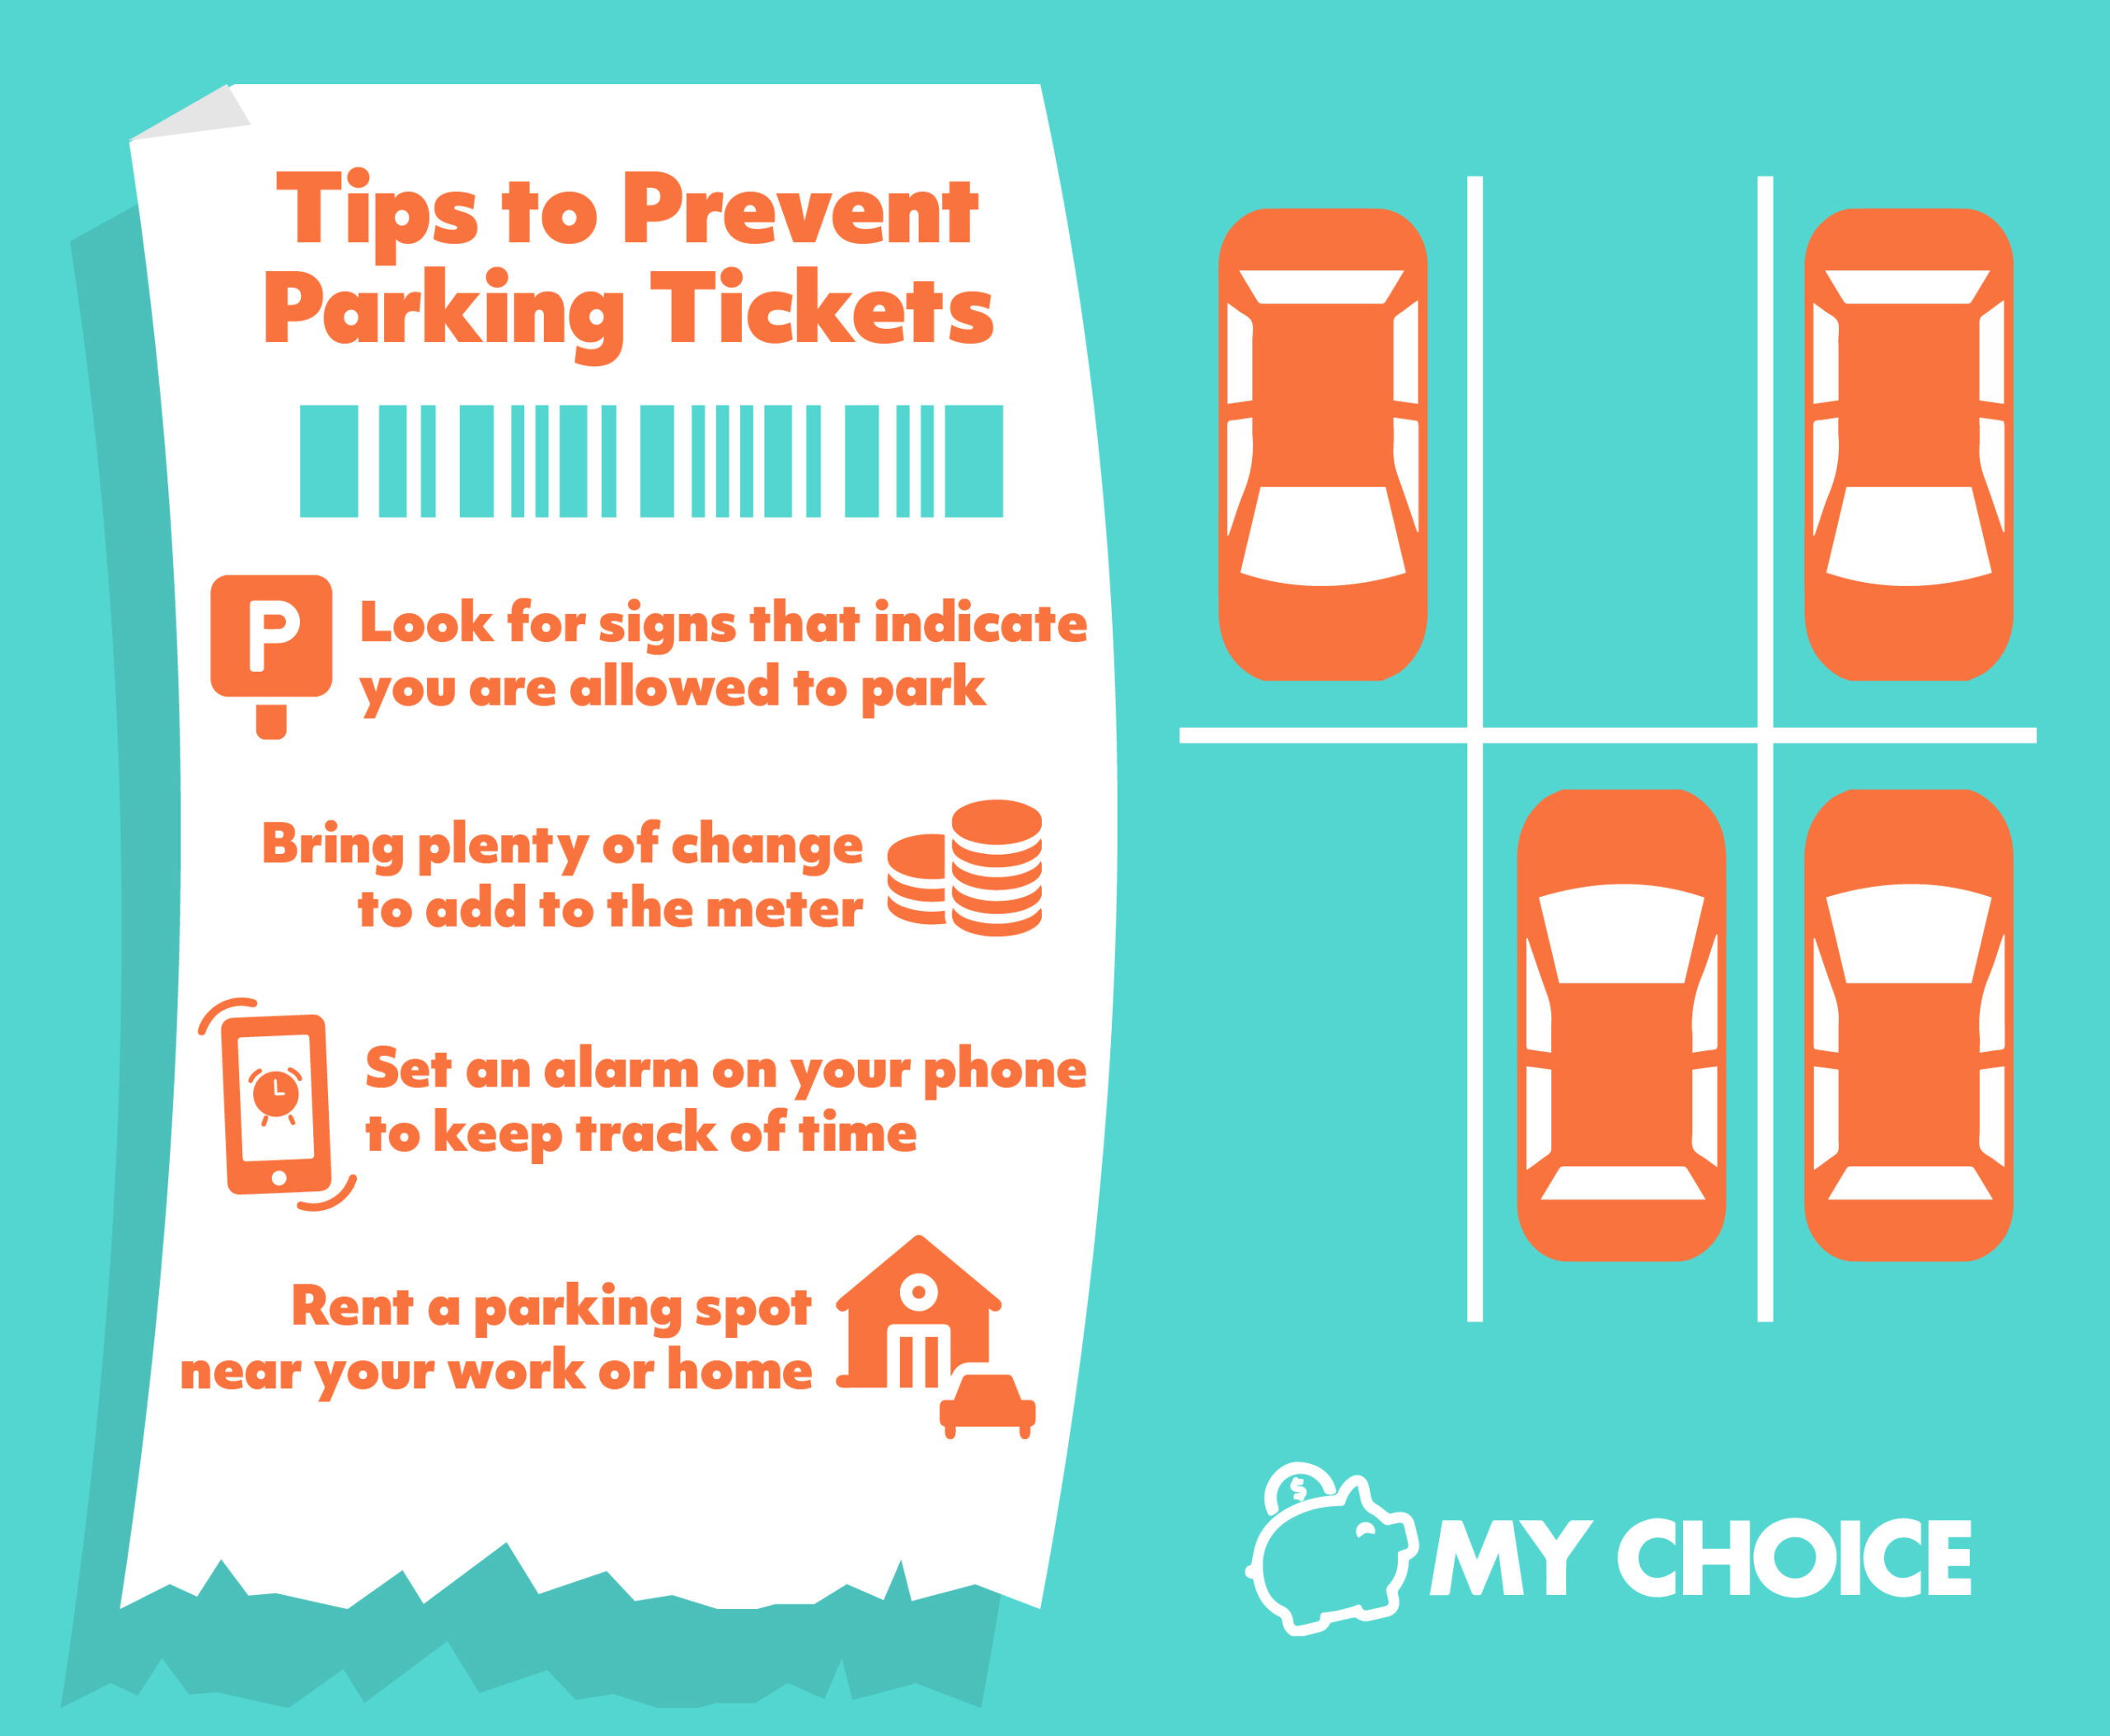 Tips to prevent parking tickets